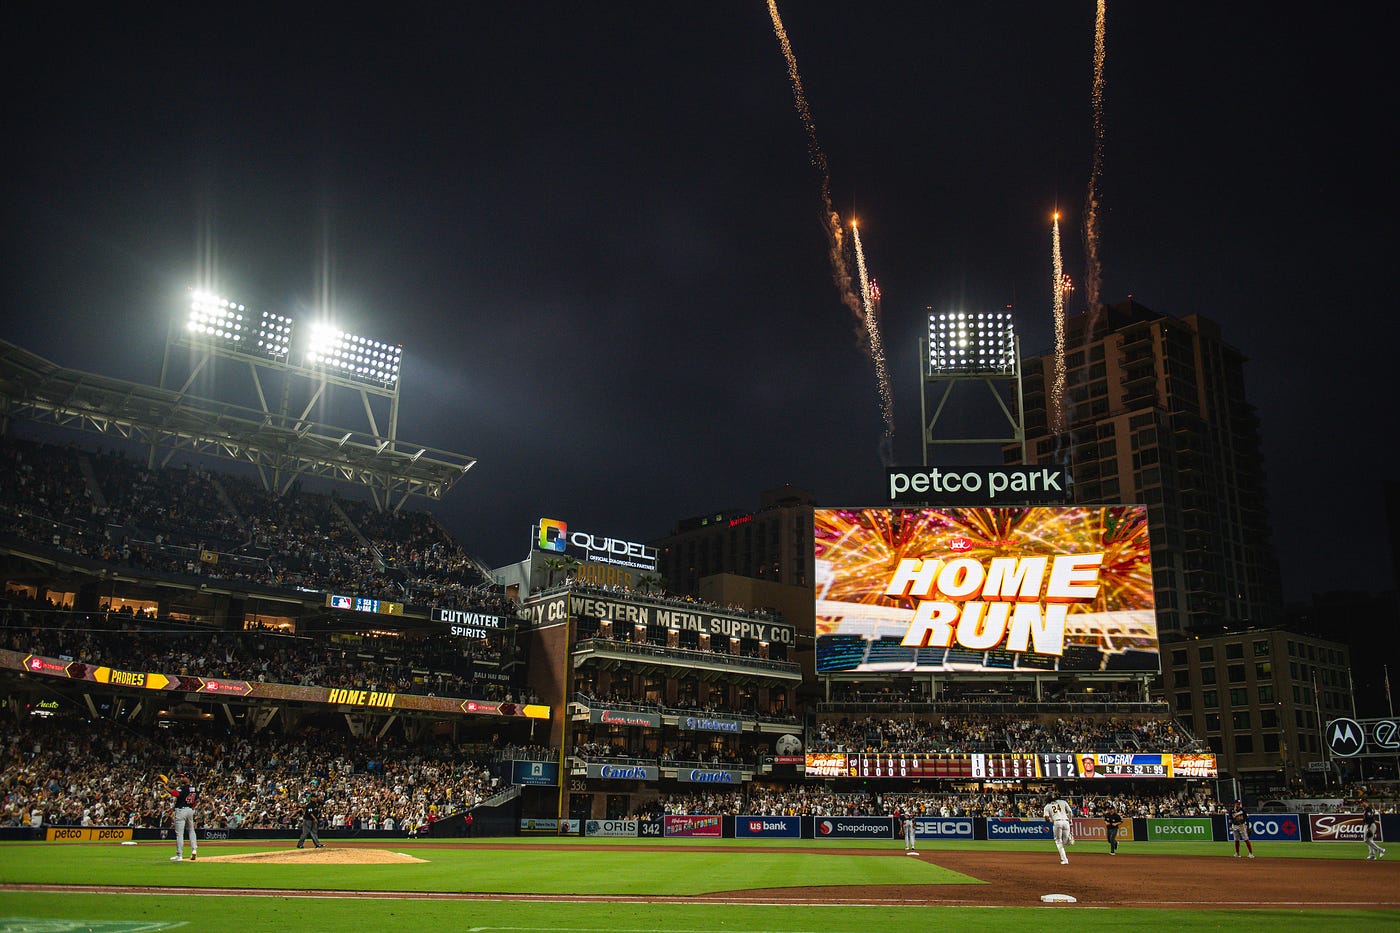 Padres Homestand №8 at Petco Park, by FriarWire